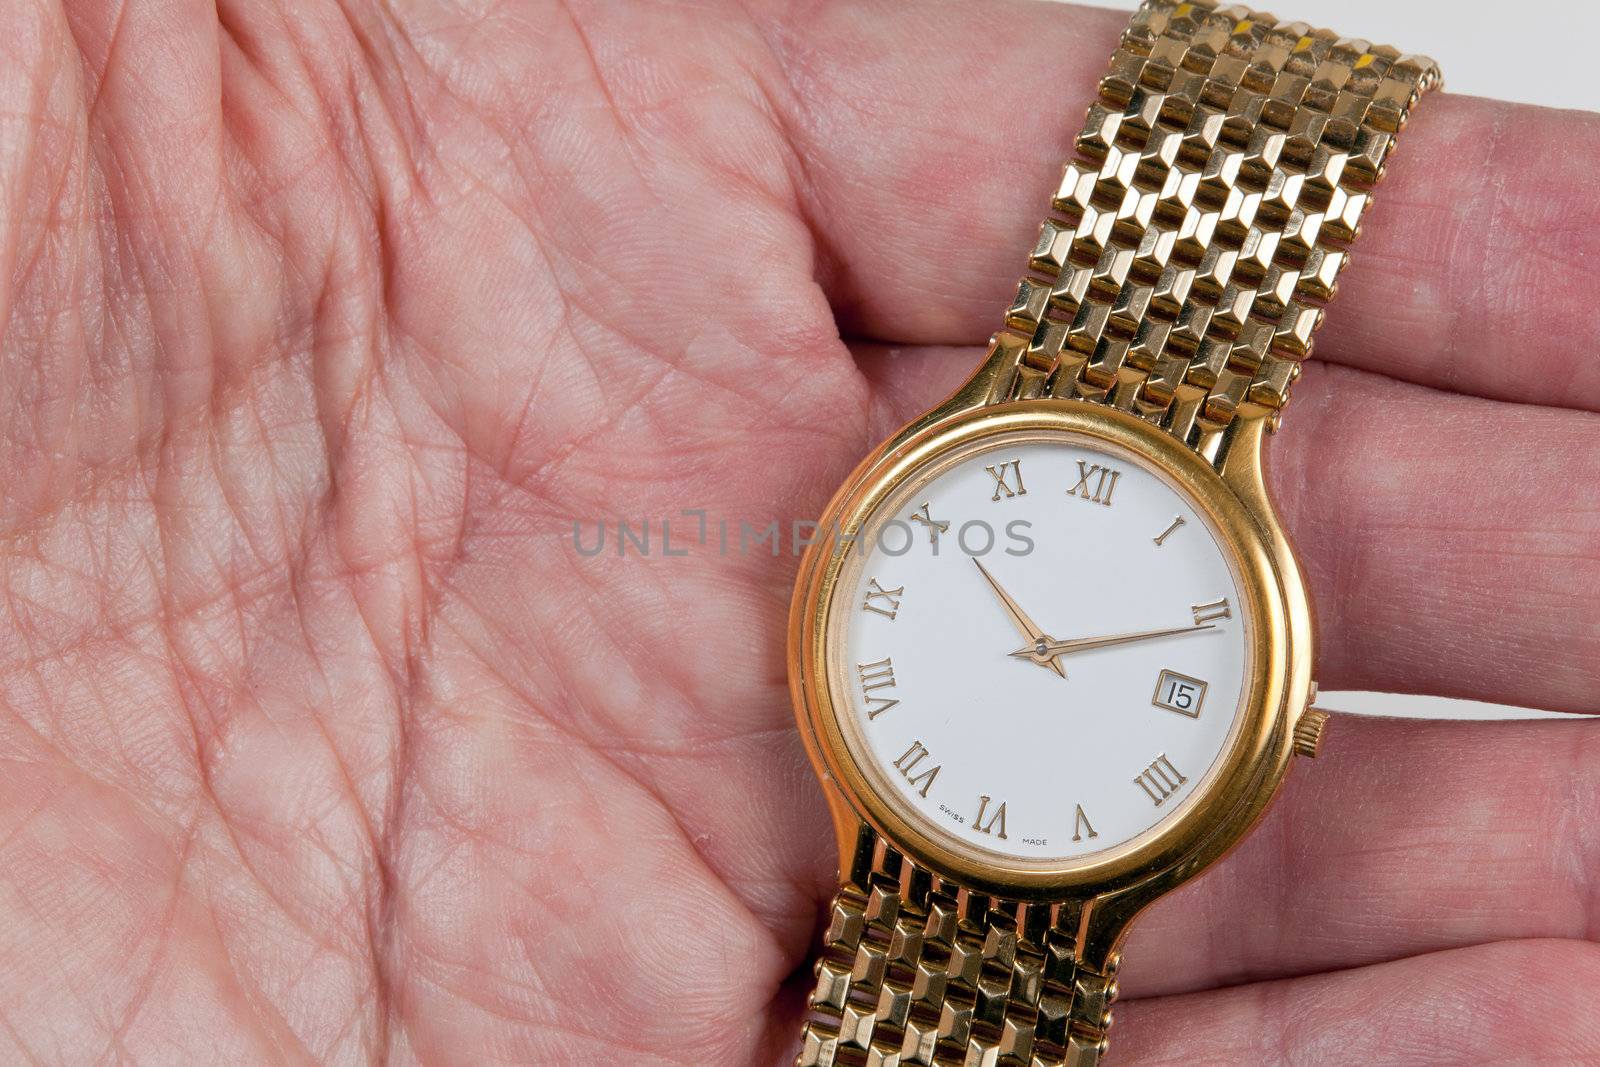 Gold watch with white face in palm of hand by steheap